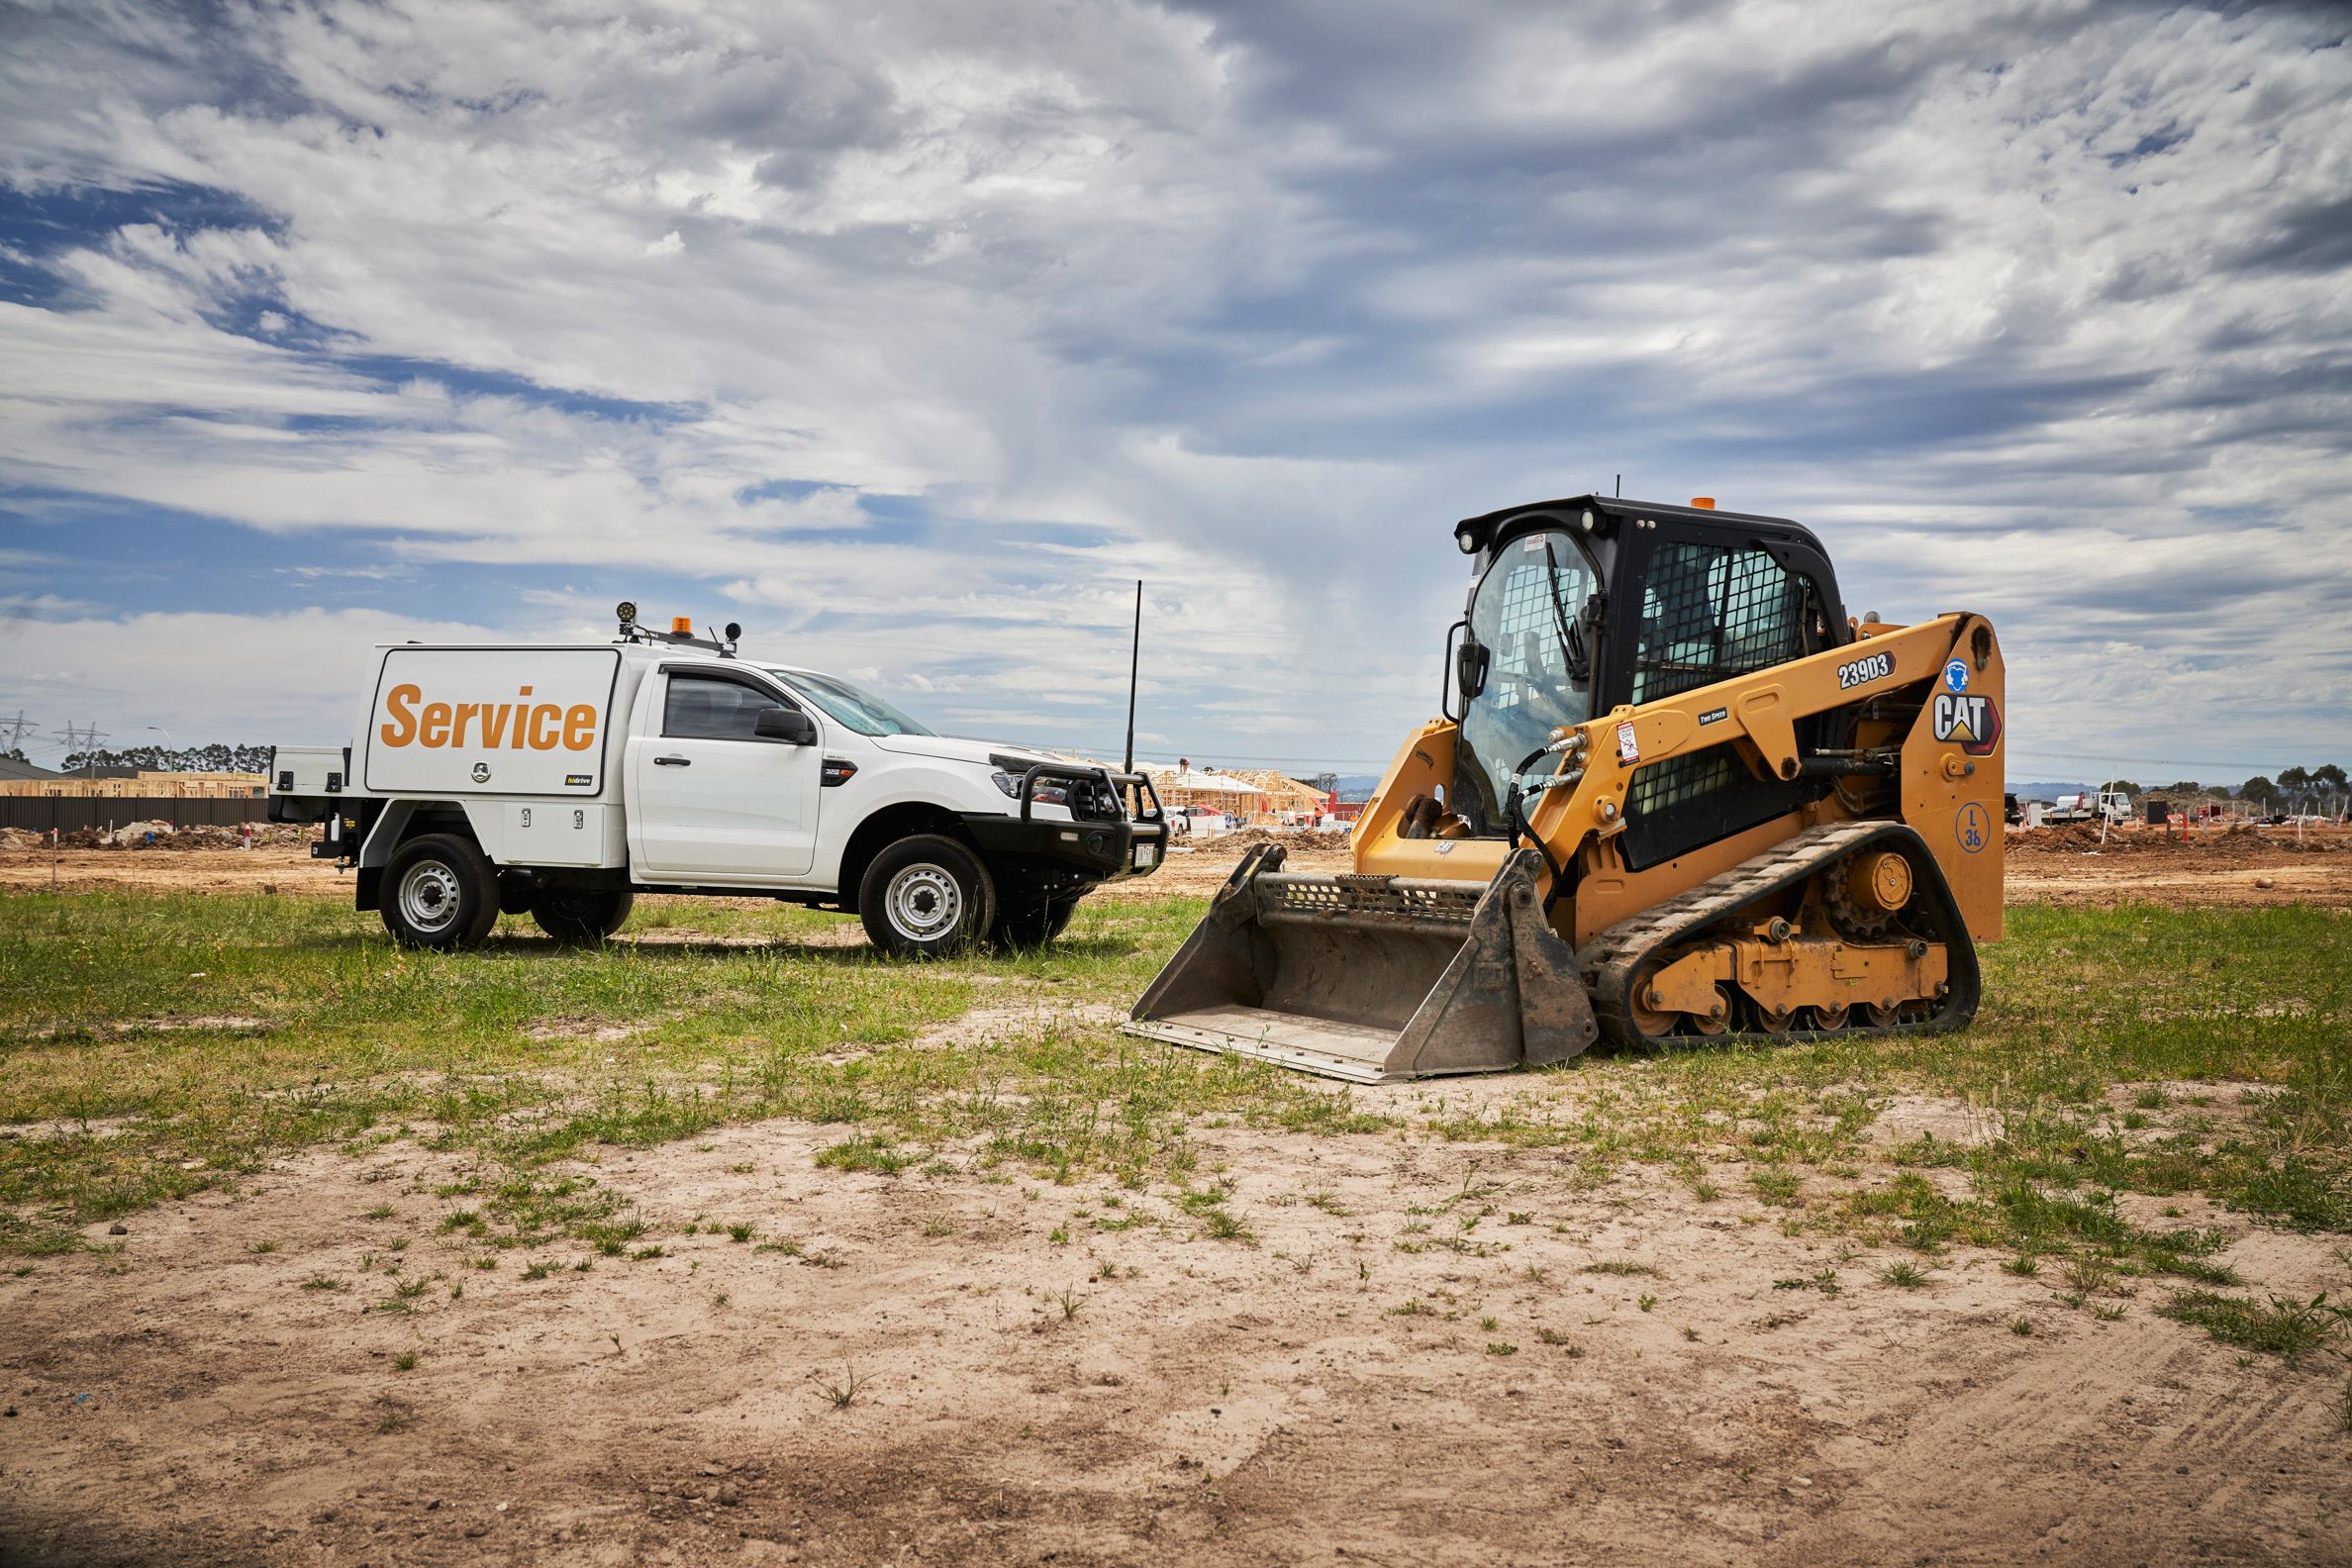 How to Store and Protect Your Heavy Equipment When Not in Use